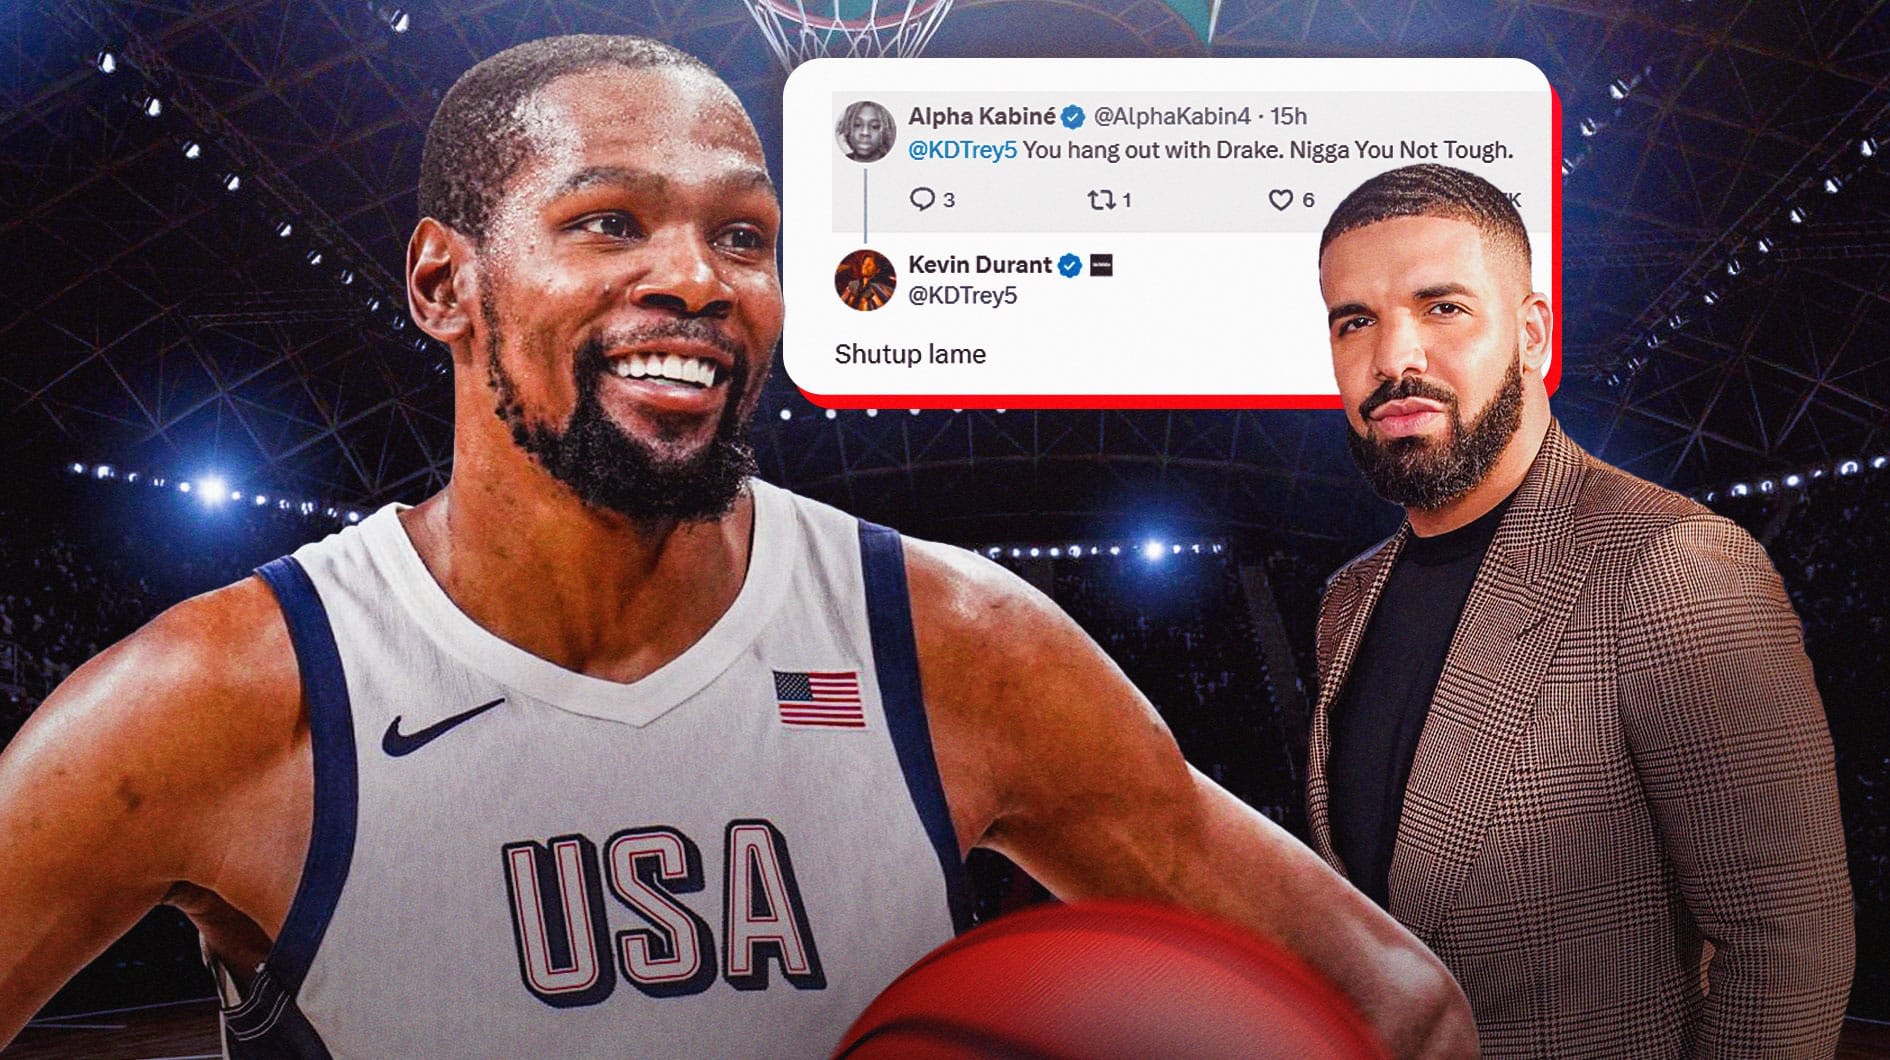 Kevin Durant uses 2 words to take down disrespectful fan